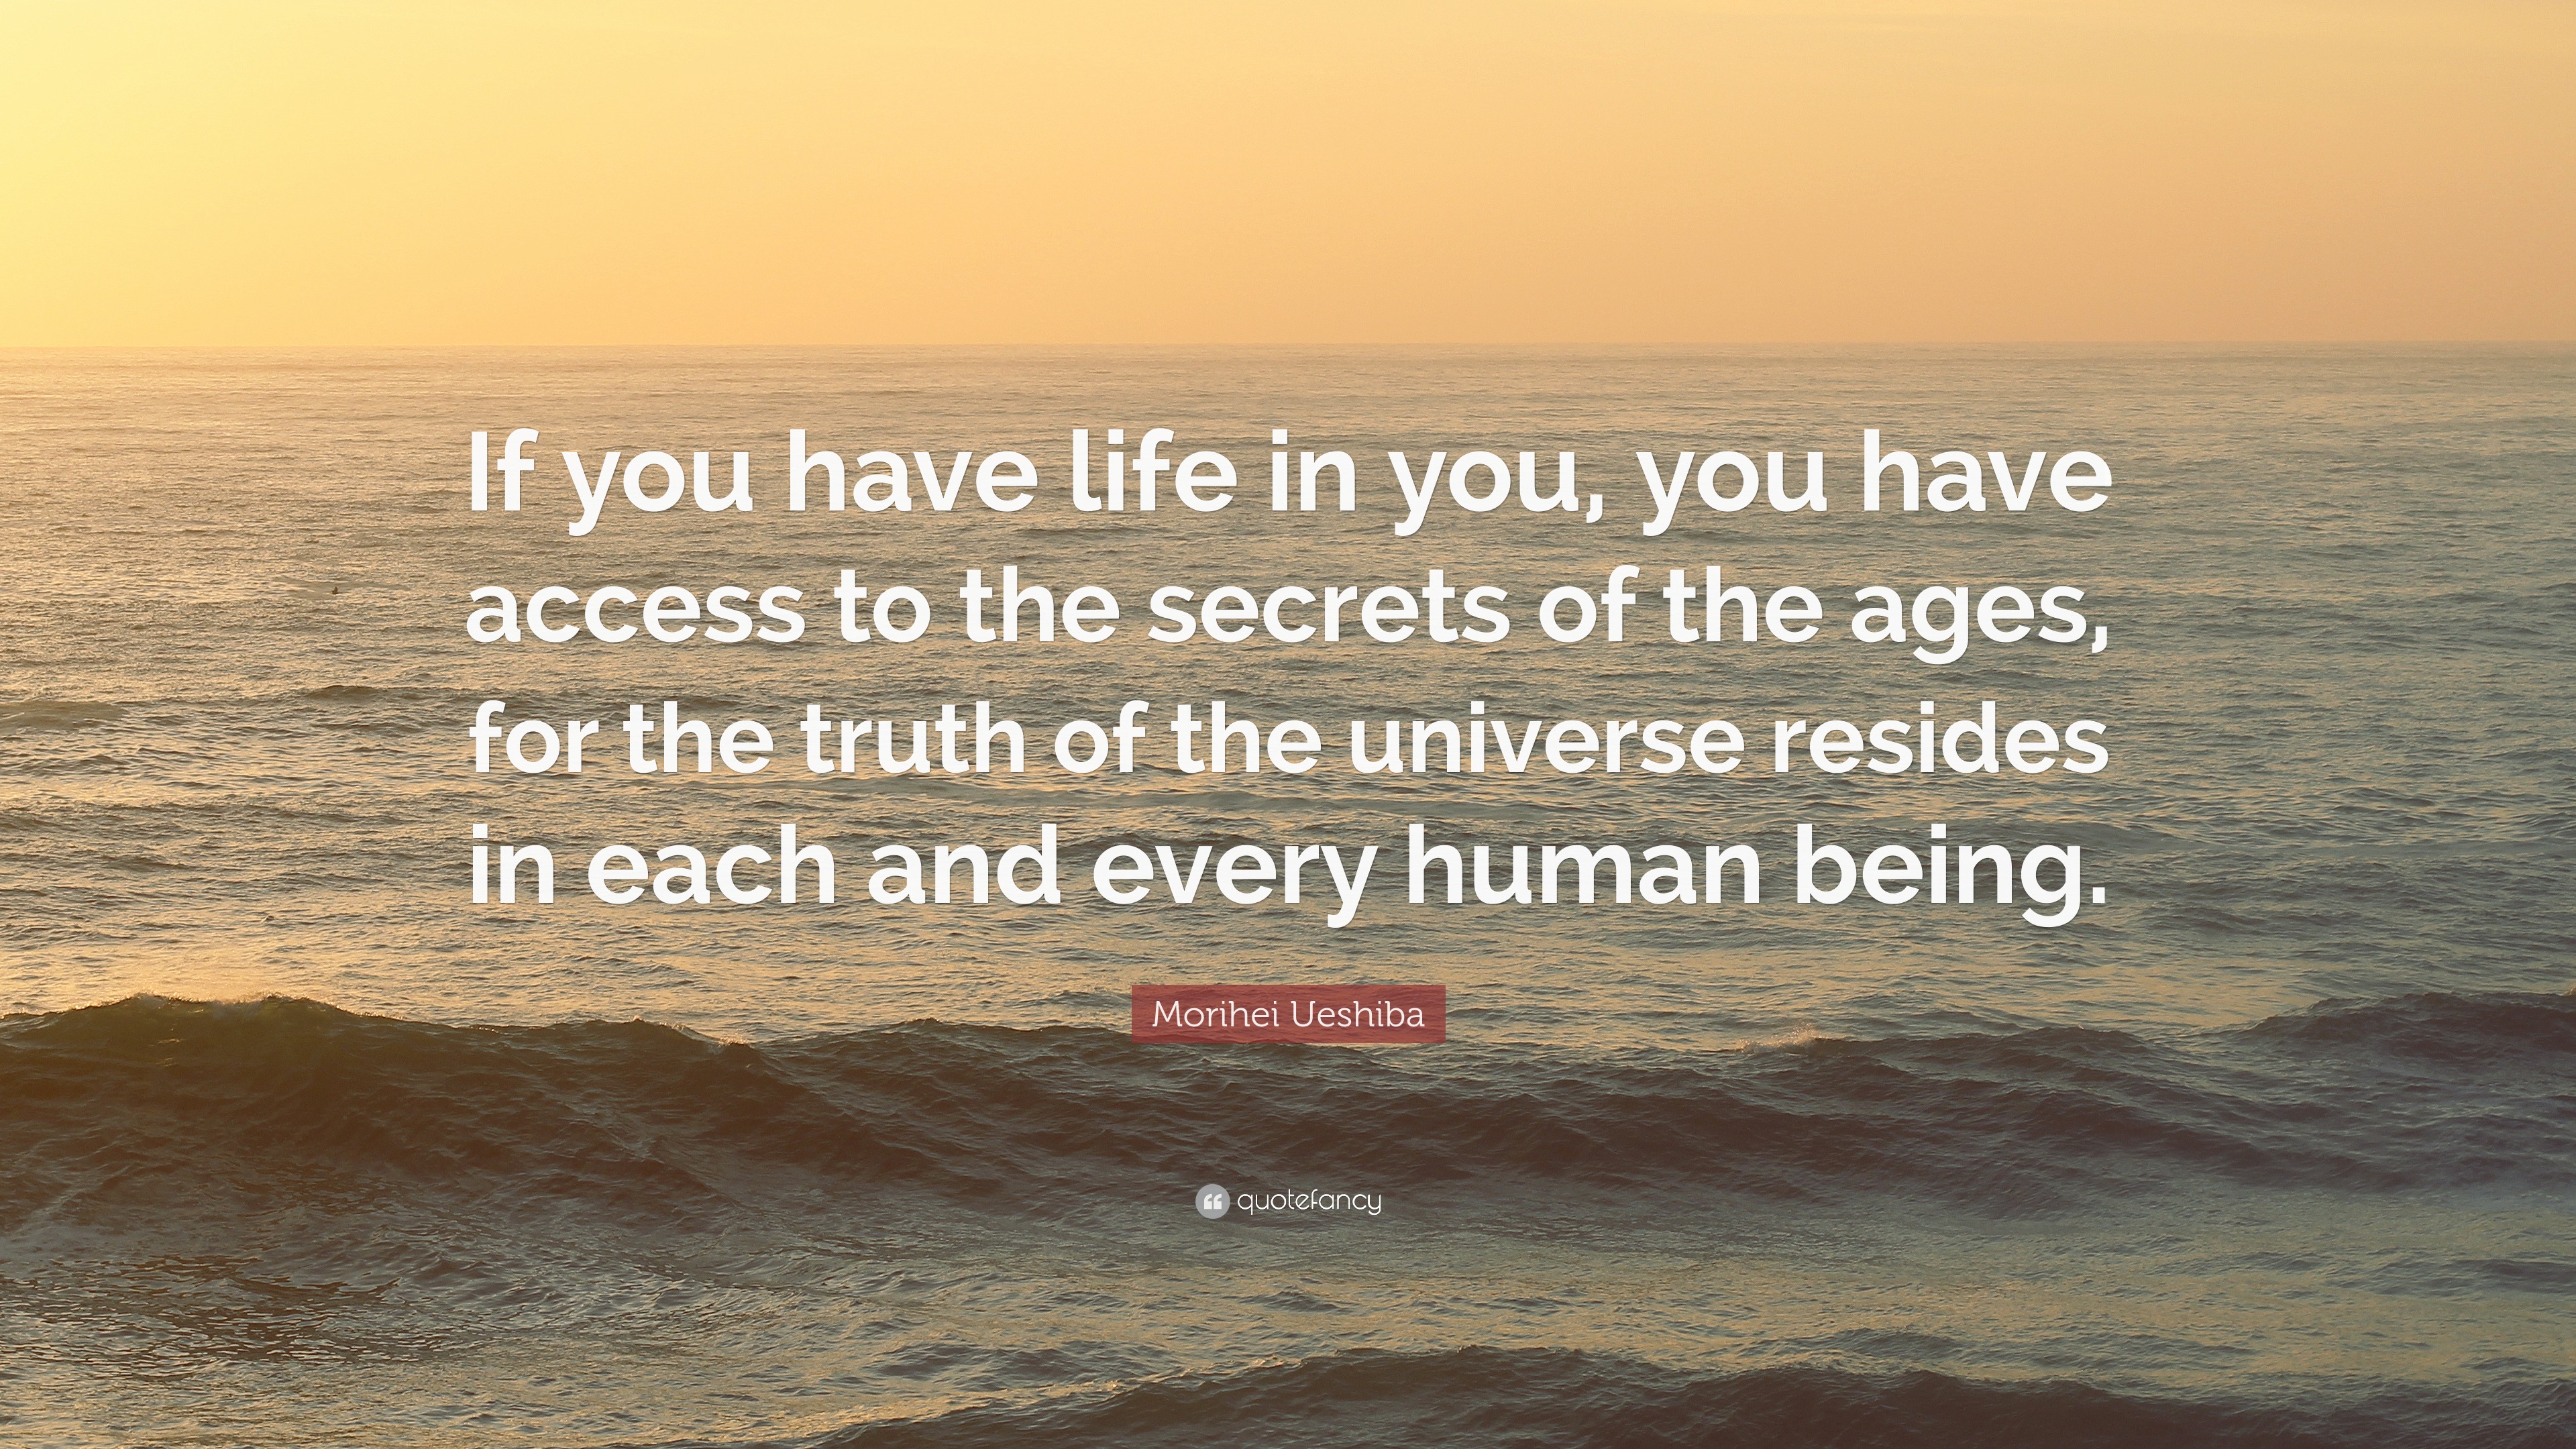 Morihei Ueshiba Quote: “If you have life in you, you have access to the  secrets of the ages, for the truth of the universe resides in each and e...”